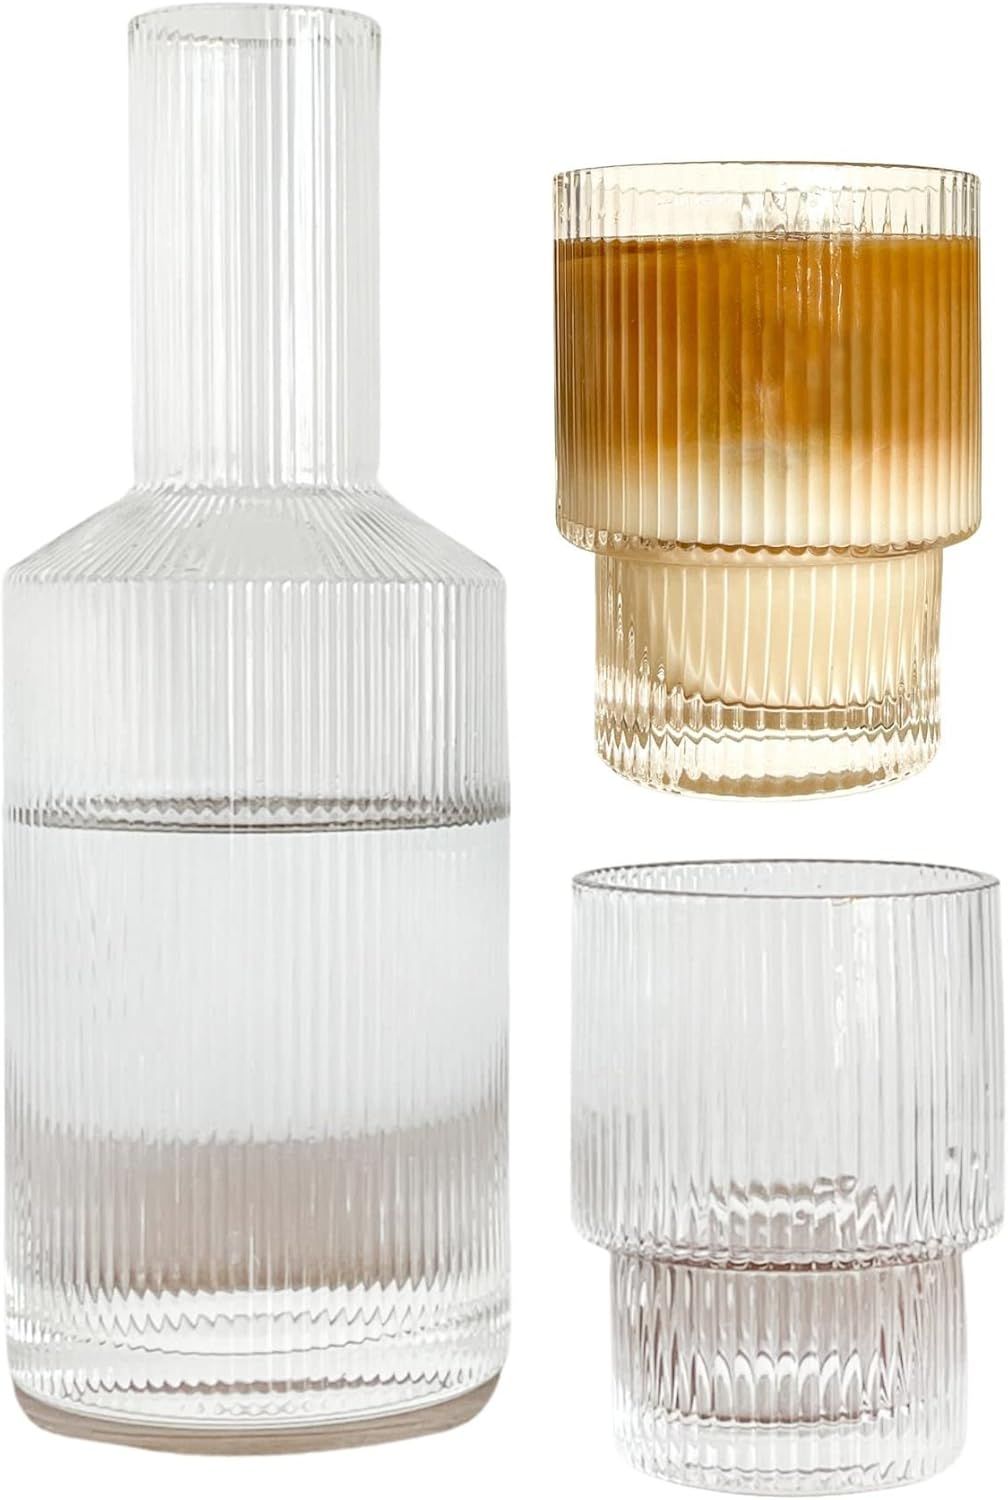 Set Of 1 Carafe 1020Ml And 2 Glasses 200Ml Ribbed With Vertical Stripes Made Of Glass | Amazon (US)